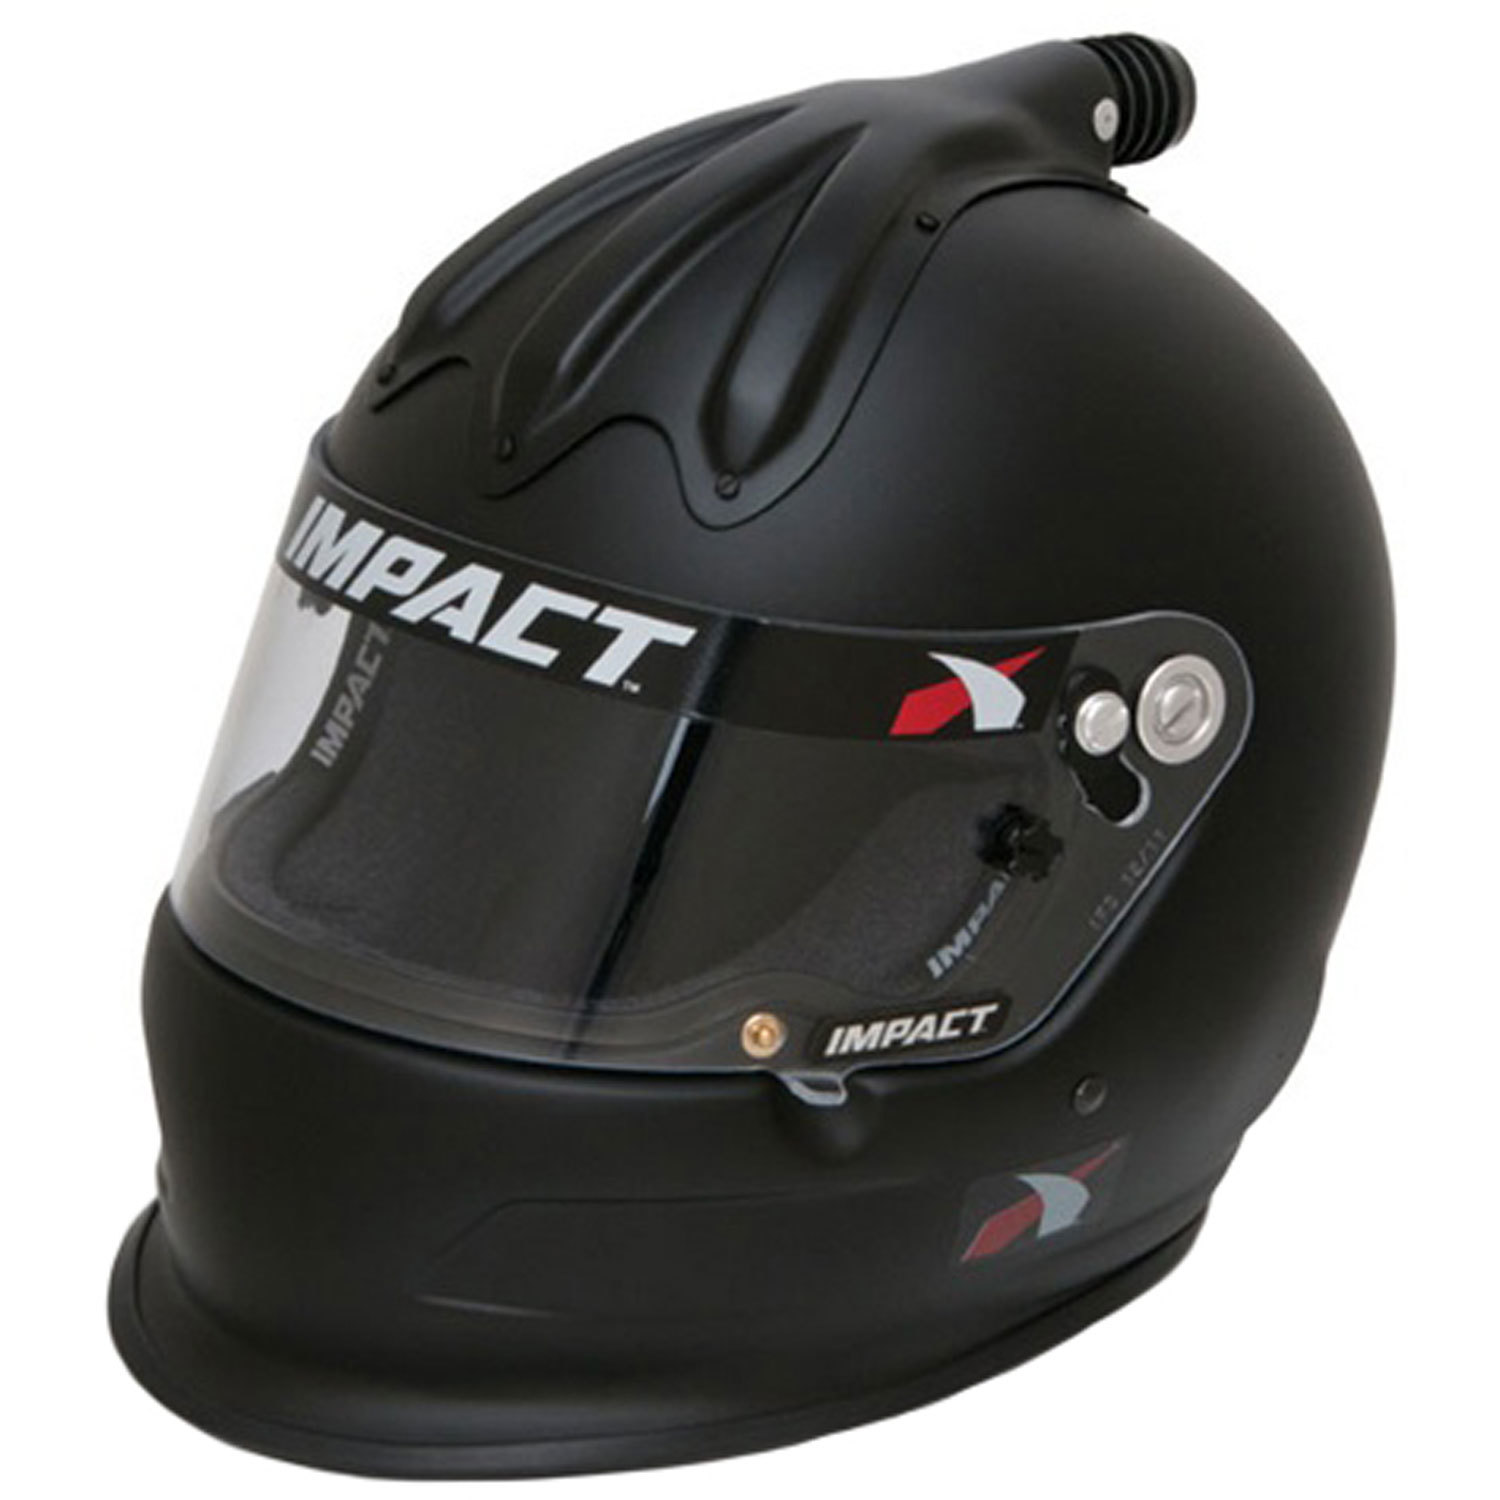 IMPACT RACING Helmet, Super Charger, Snell SA2015, Head and Neck Support Ready, Flat Black, X-Large, Each